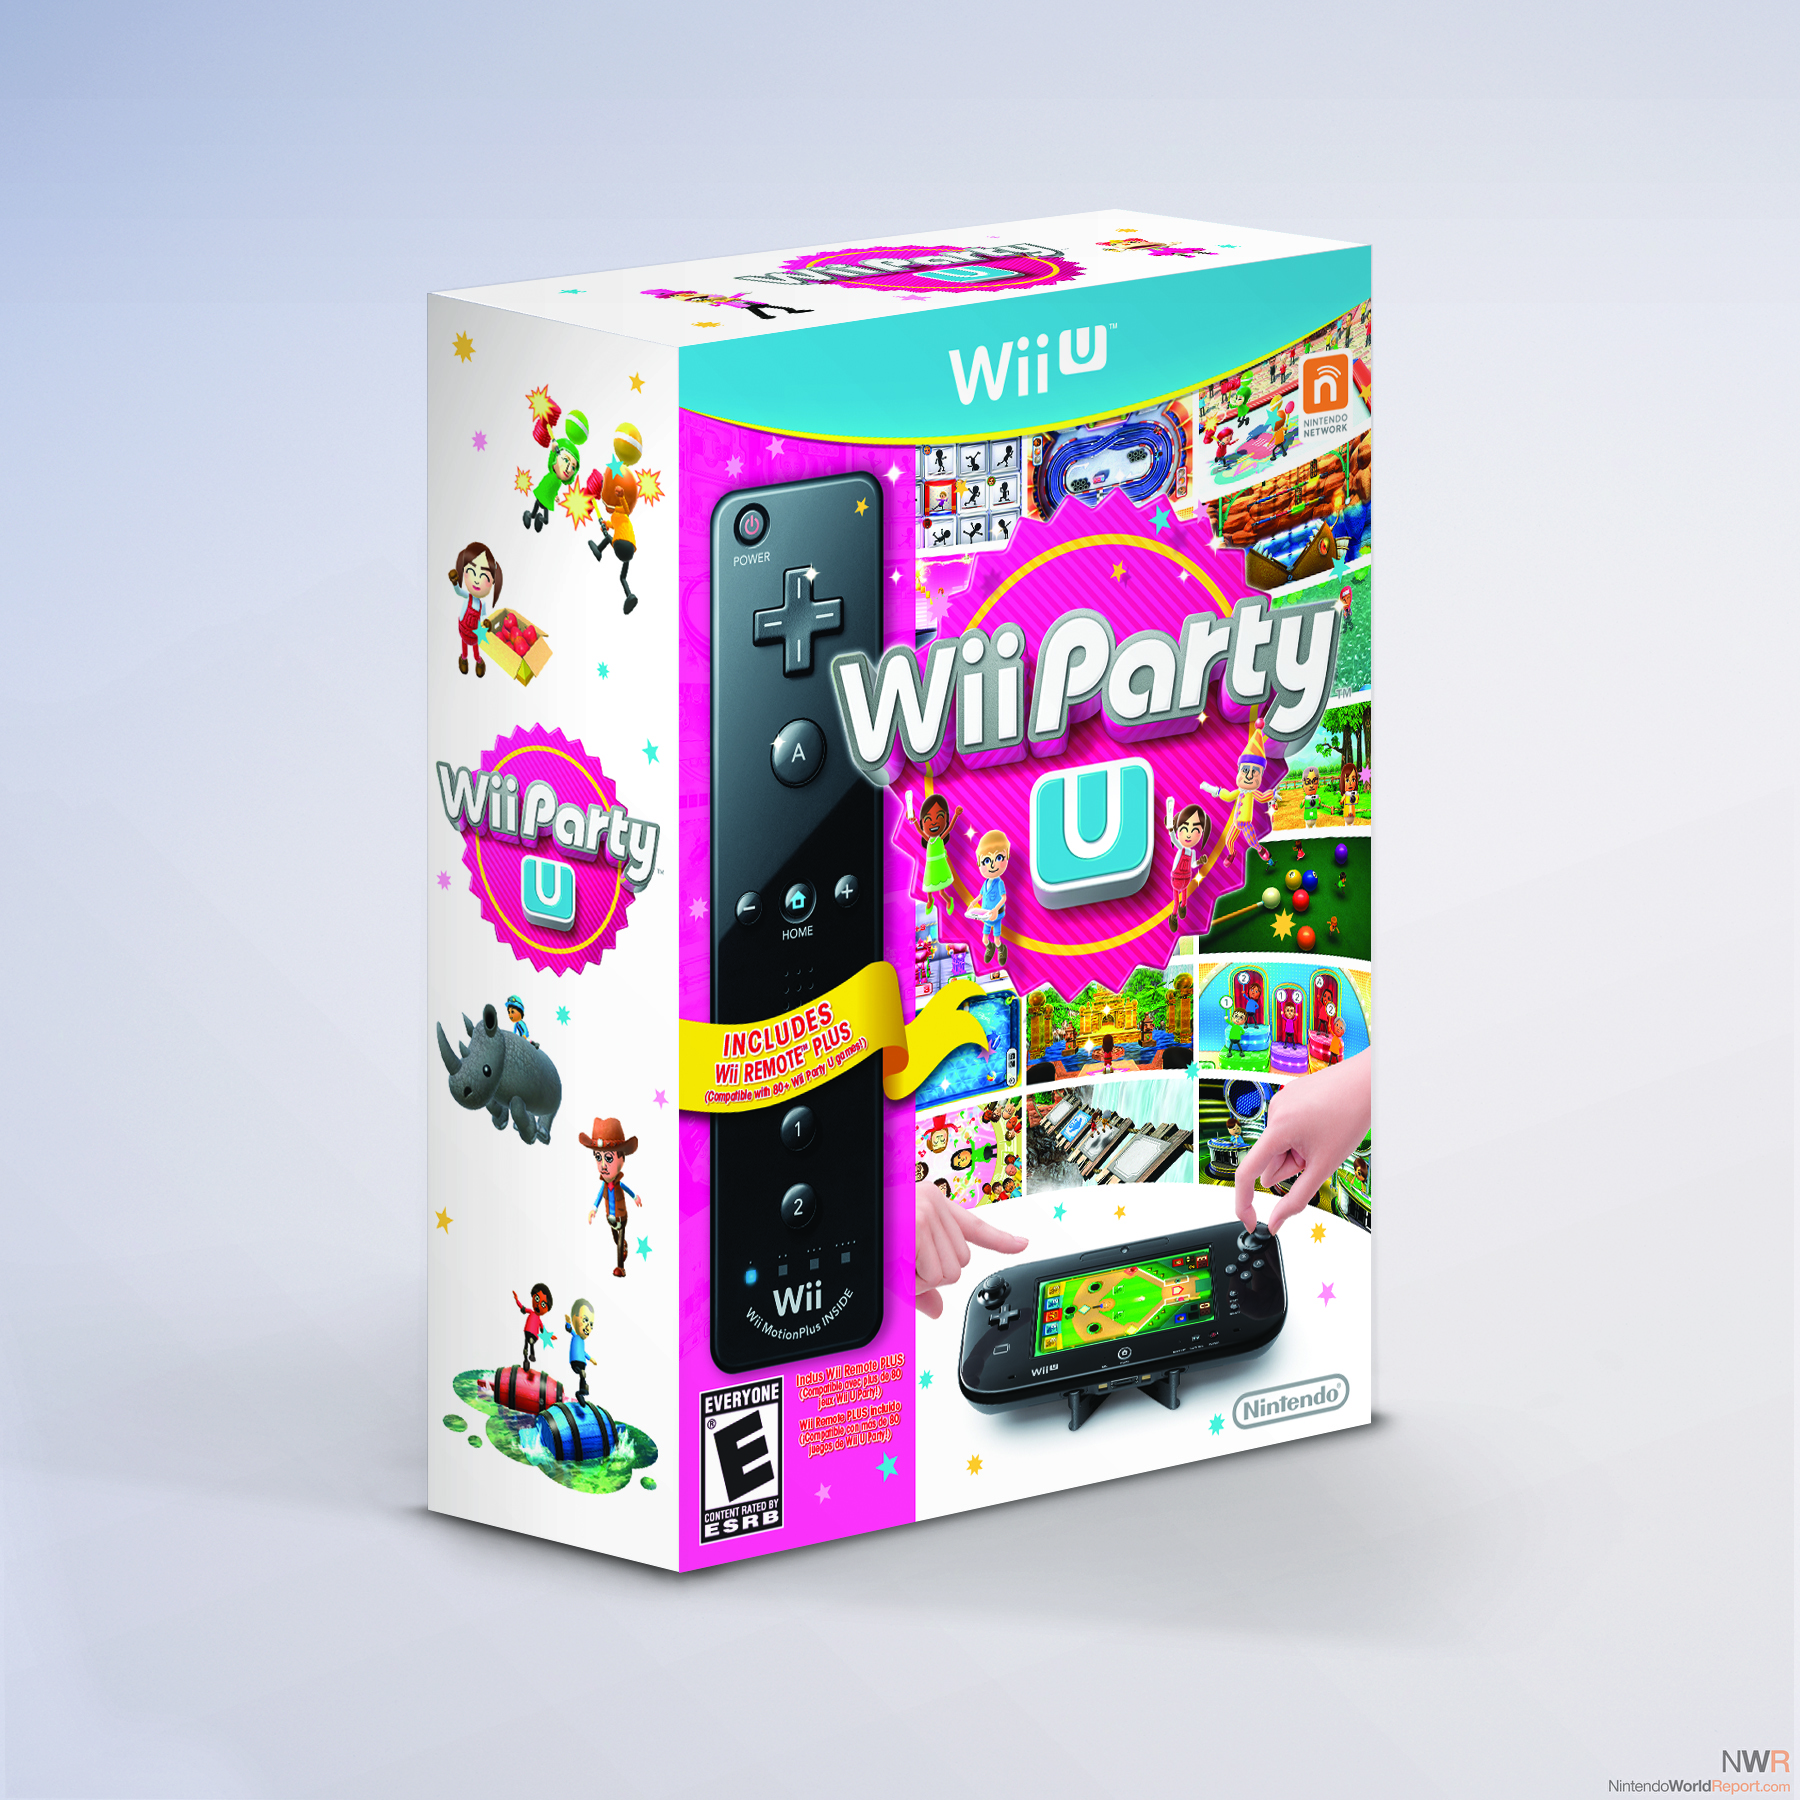 Wii Party U Hands-on Preview - Hands-on Preview - Nintendo World Report